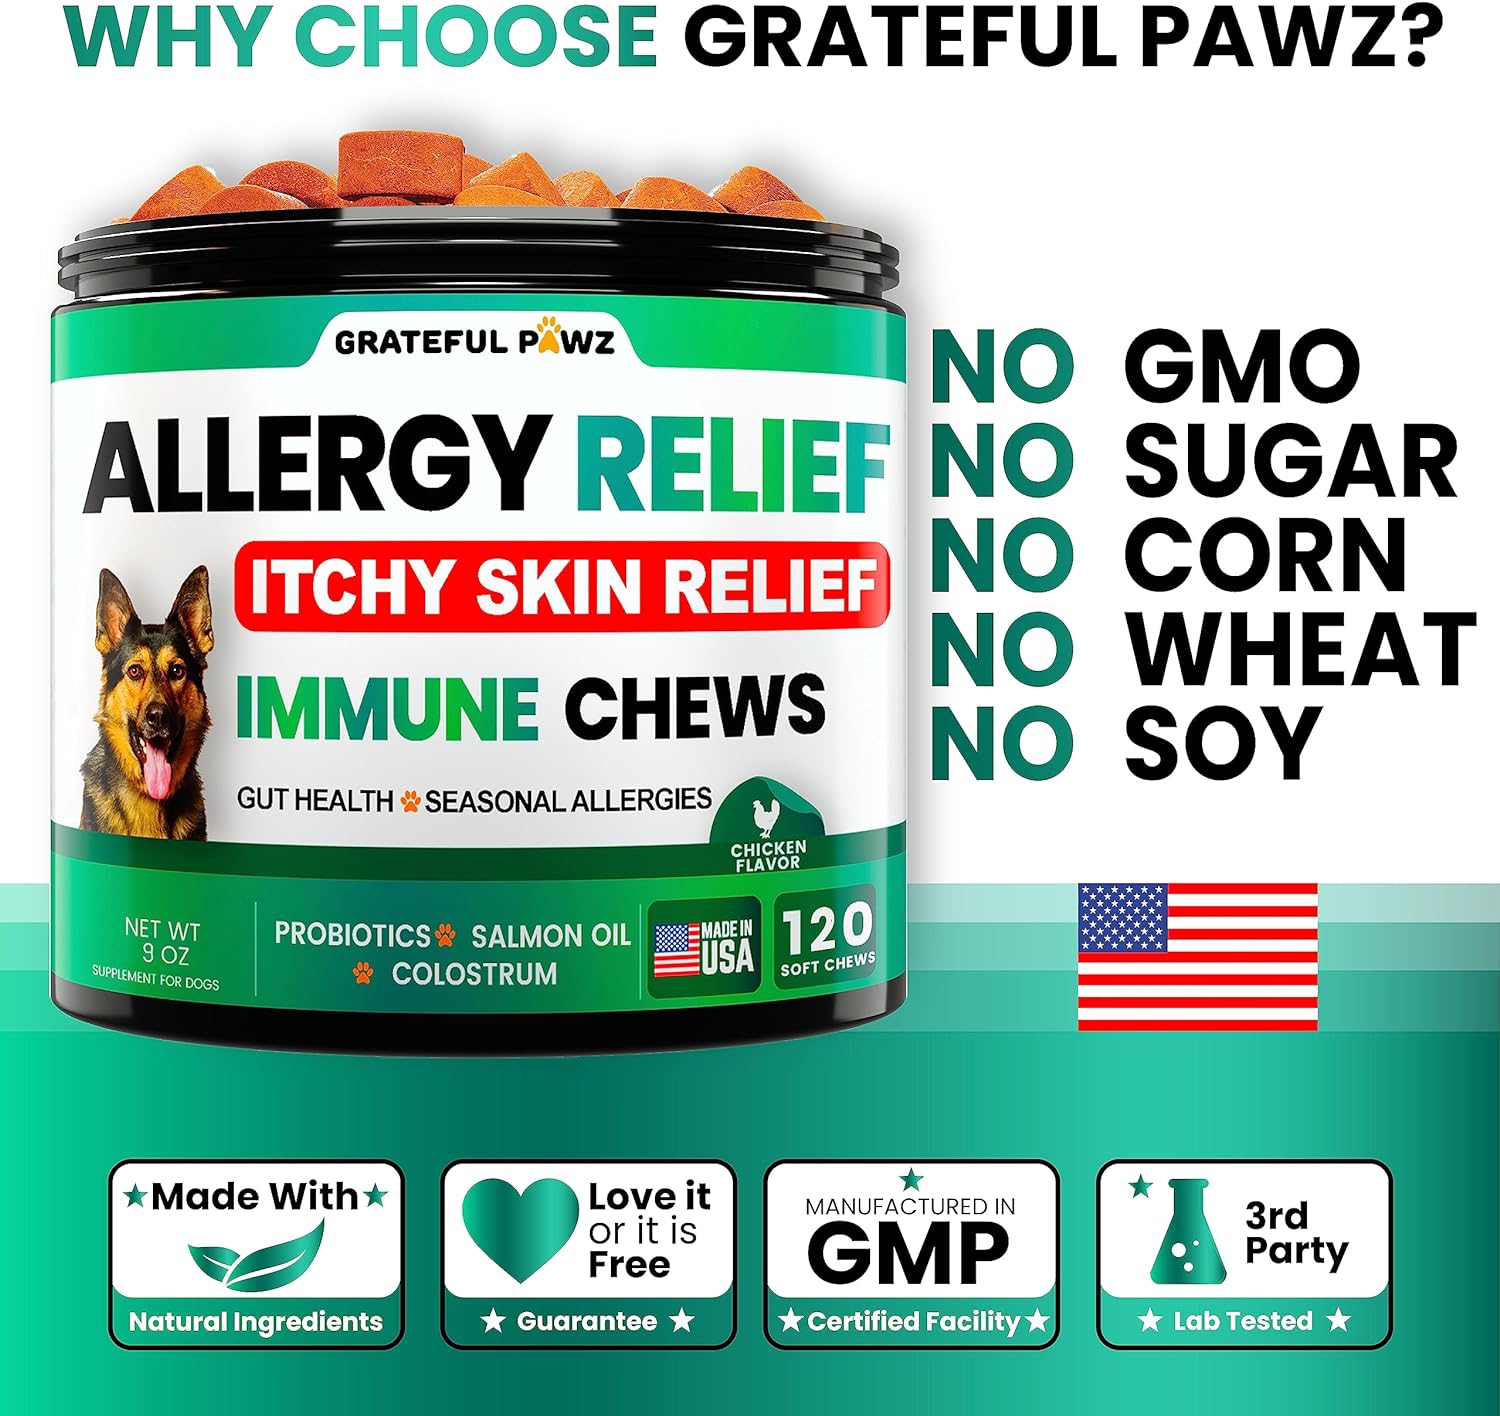 Dog Allergy Relief Chews - Dog Itch Relief - Probiotics, Omega 3 Fish Oil + Colostrum - Itchy Skin Relief - Seasonal Allergies - Anti Itch Support & Hot Spots - Immune Health Supplement - Made in USA : Pet Supplies